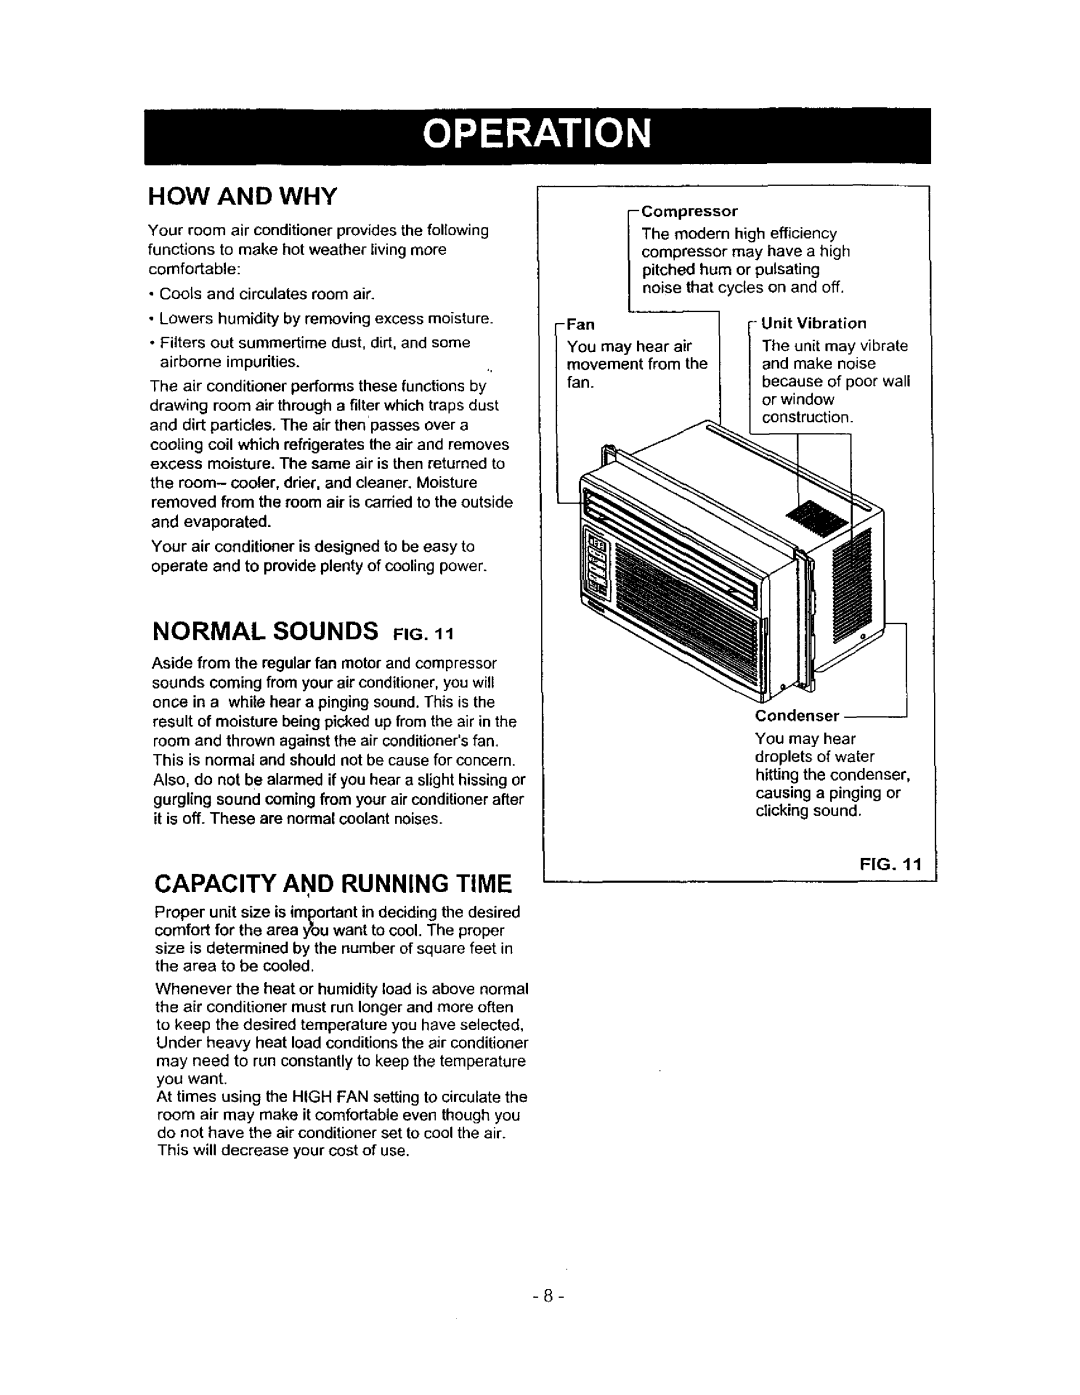 Kenmore 580.71056 owner manual How And Why, Normal Sounds, Capacity And Running Time, You may 